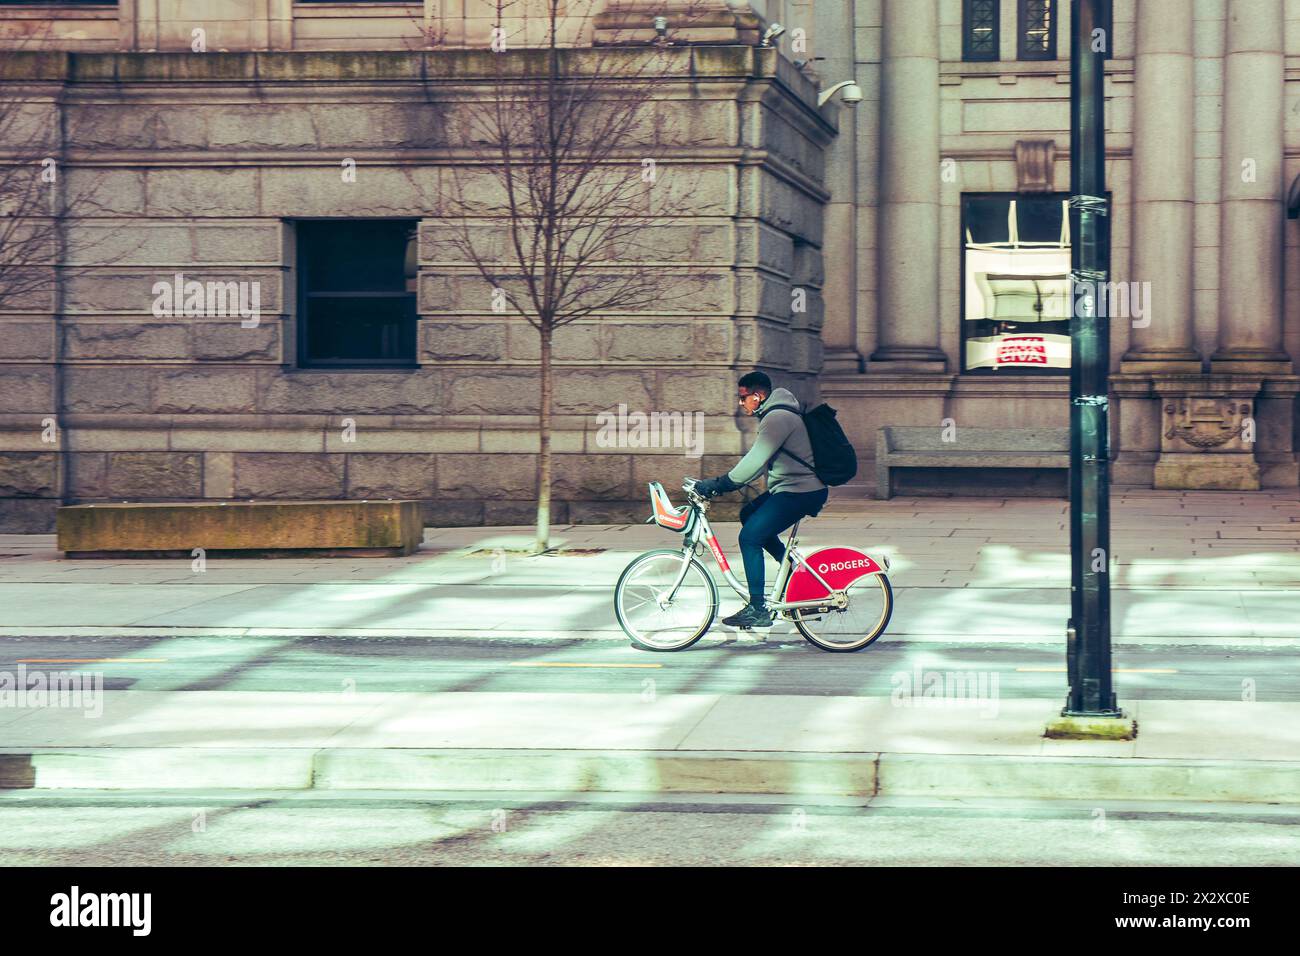 A man riding a bike share bicycle in the Hornby Street bike lane, in front of the Vancouver Art Gallery building illuminated by reflected light. Stock Photo